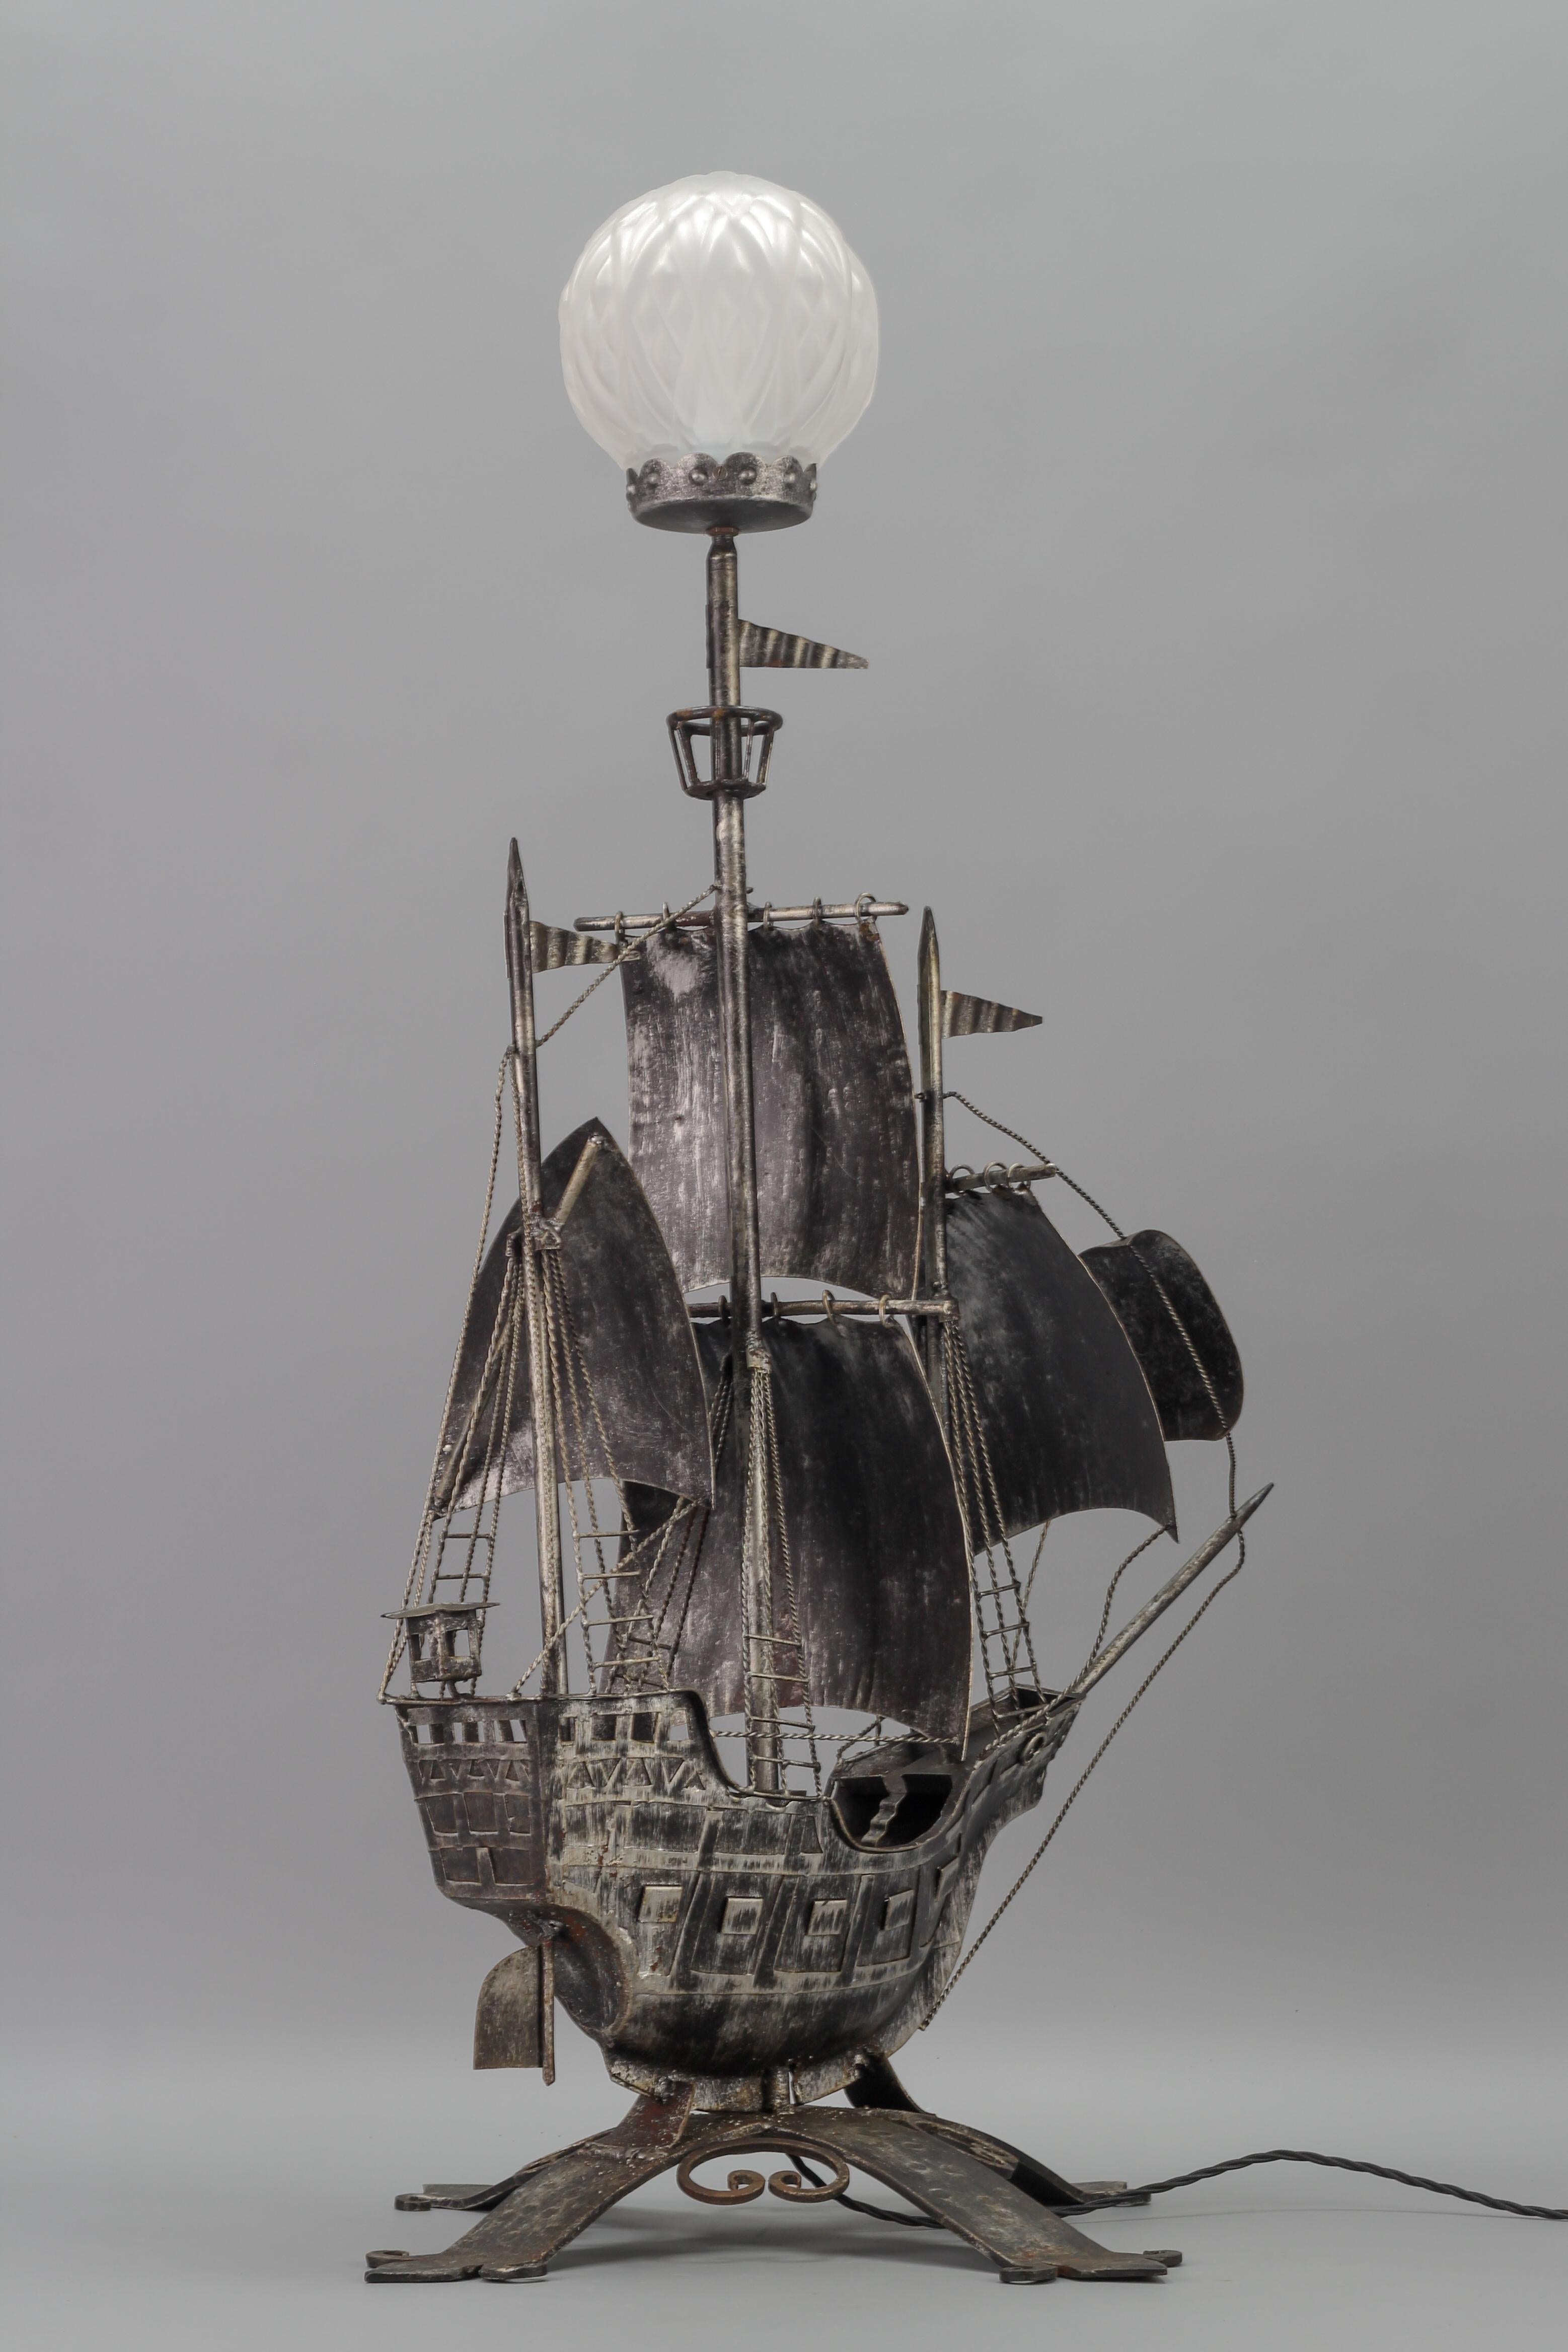 Frosted Wrought Iron and Glass Spanish Galleon Sailing Ship Shaped Floor Lamp, 1950s For Sale